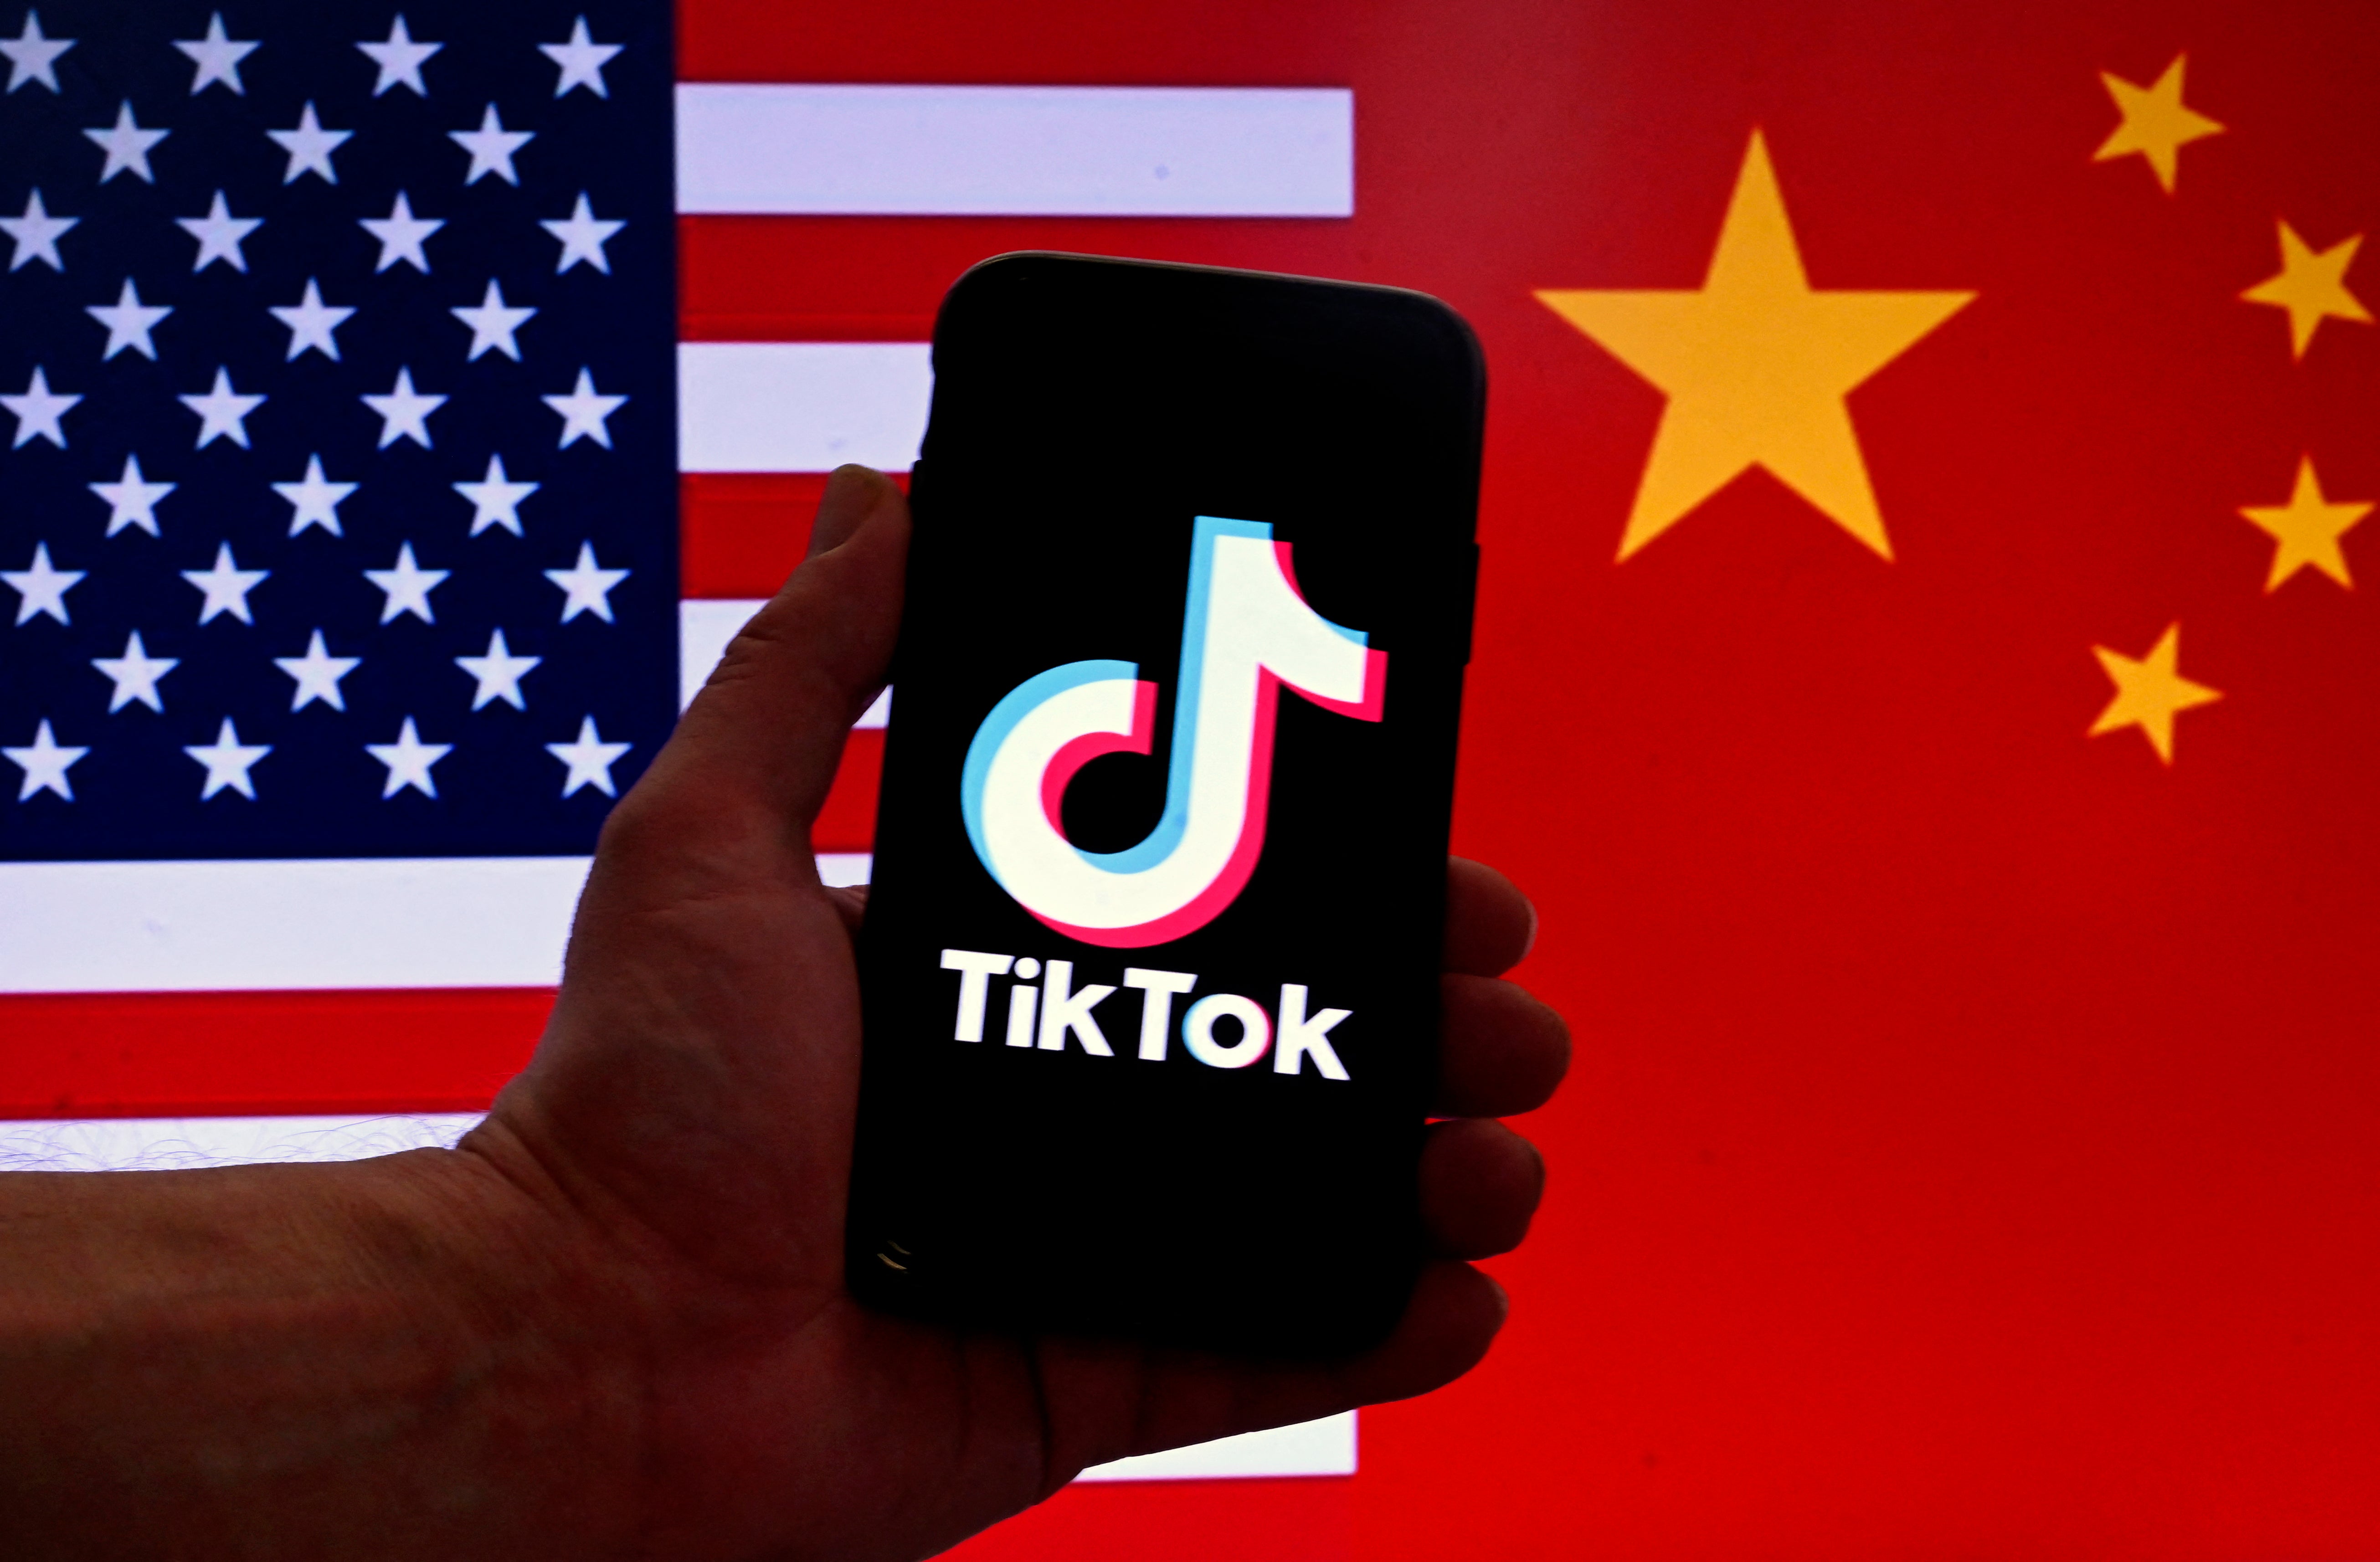 America’s House of Representatives have passed a bill to ‘ban’ TikTok